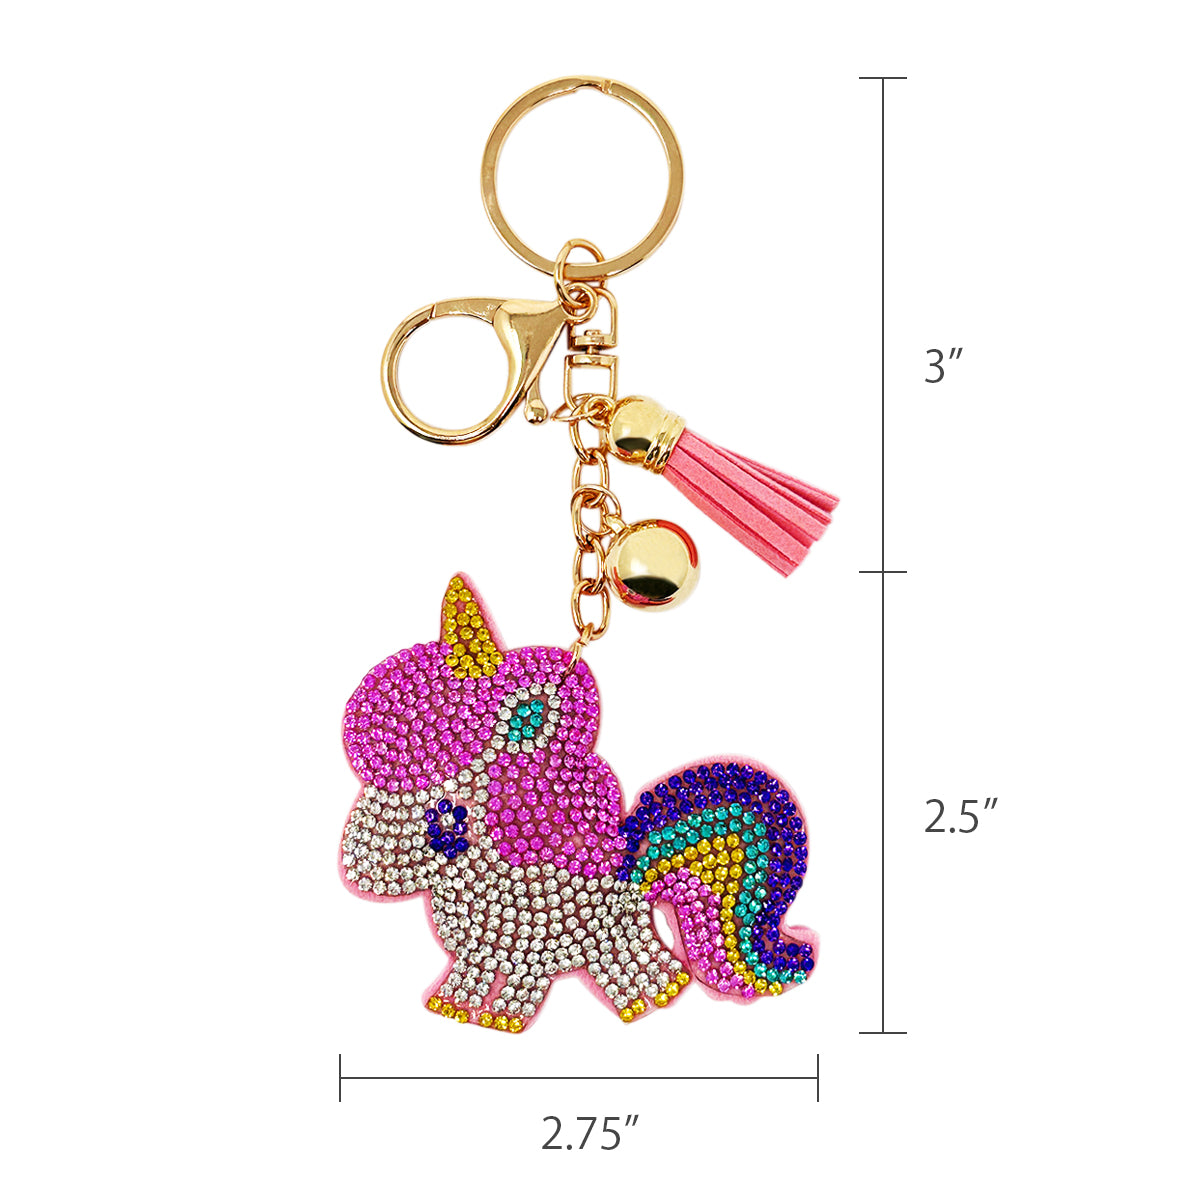 Bling bling bear keychain cute sparkly keyring grey diamond crystal stones  tassel leather rope key chains car keys holder bling cute gifts for ladies